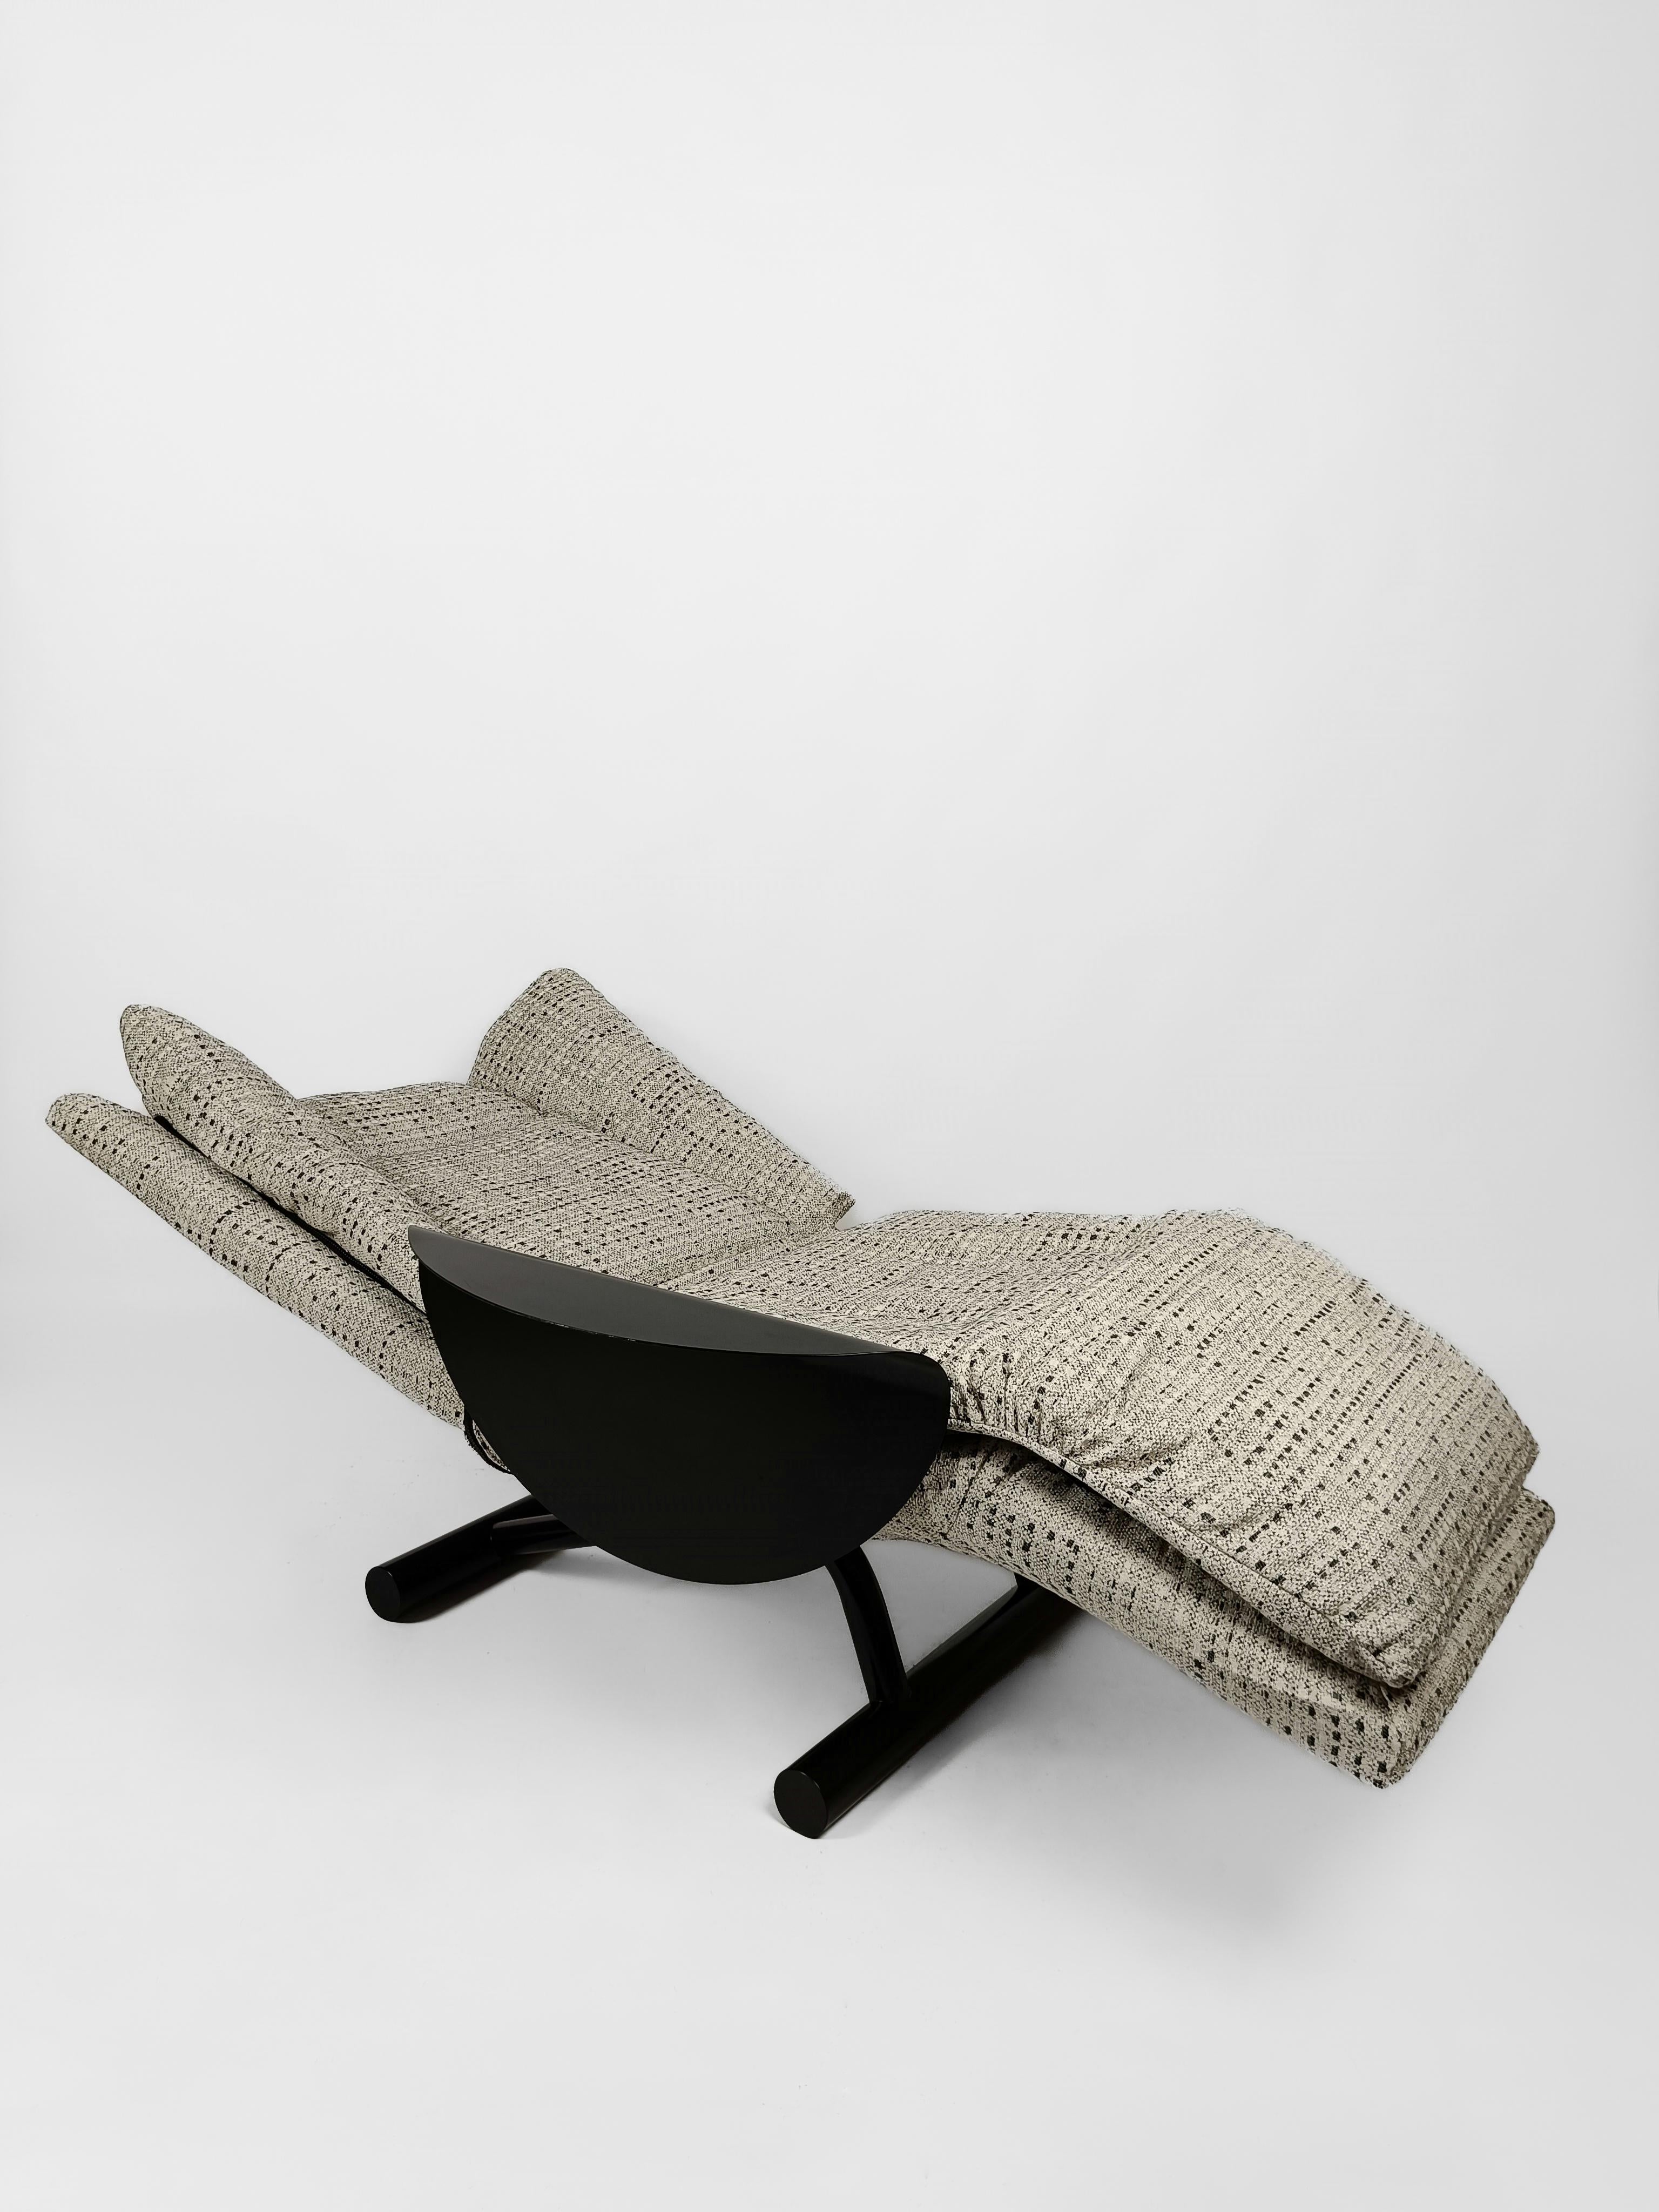 Italian Post-Modern Reclining Lounge Chair, Chaise by Cinova, 1980s  For Sale 9